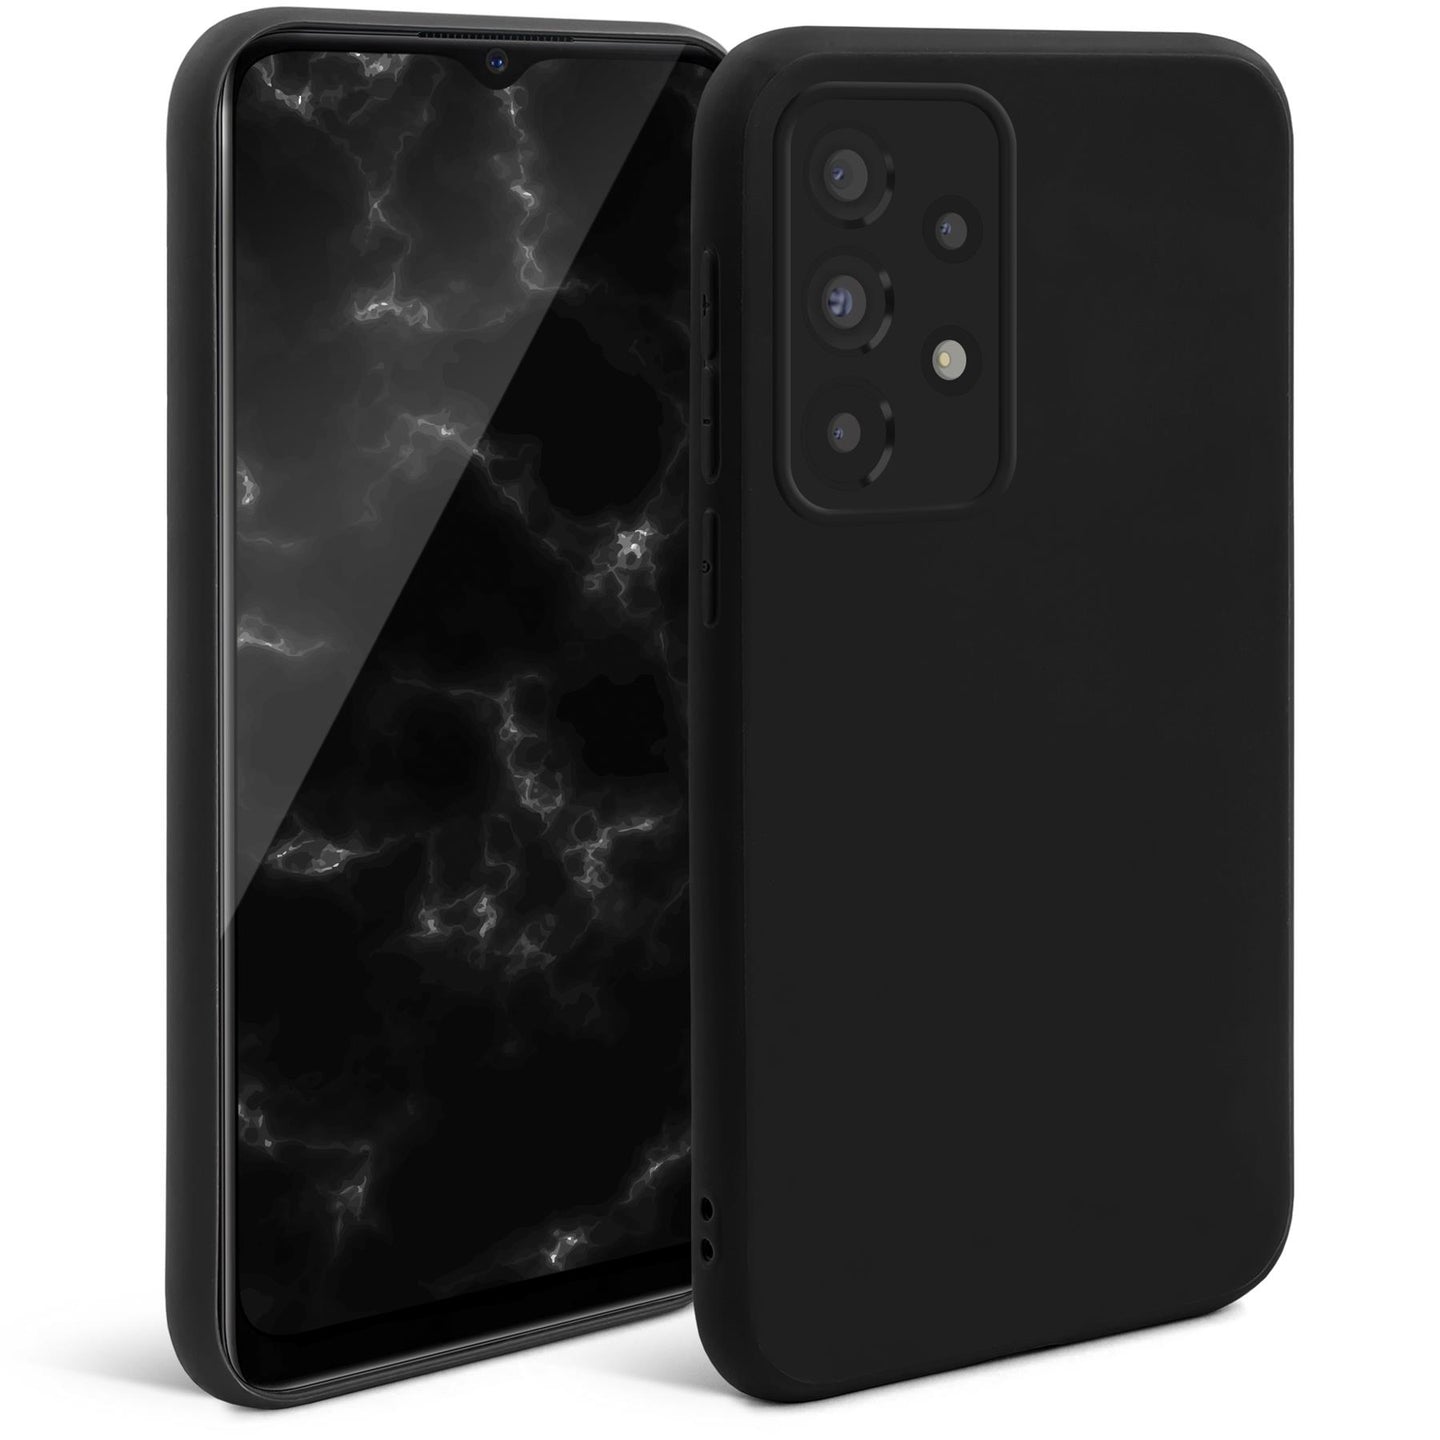 Moozy Minimalist Series Silicone Case for Samsung A13 4G, Black - Matte Finish Lightweight Mobile Phone Case Slim Soft Protective TPU Cover with Matte Surface